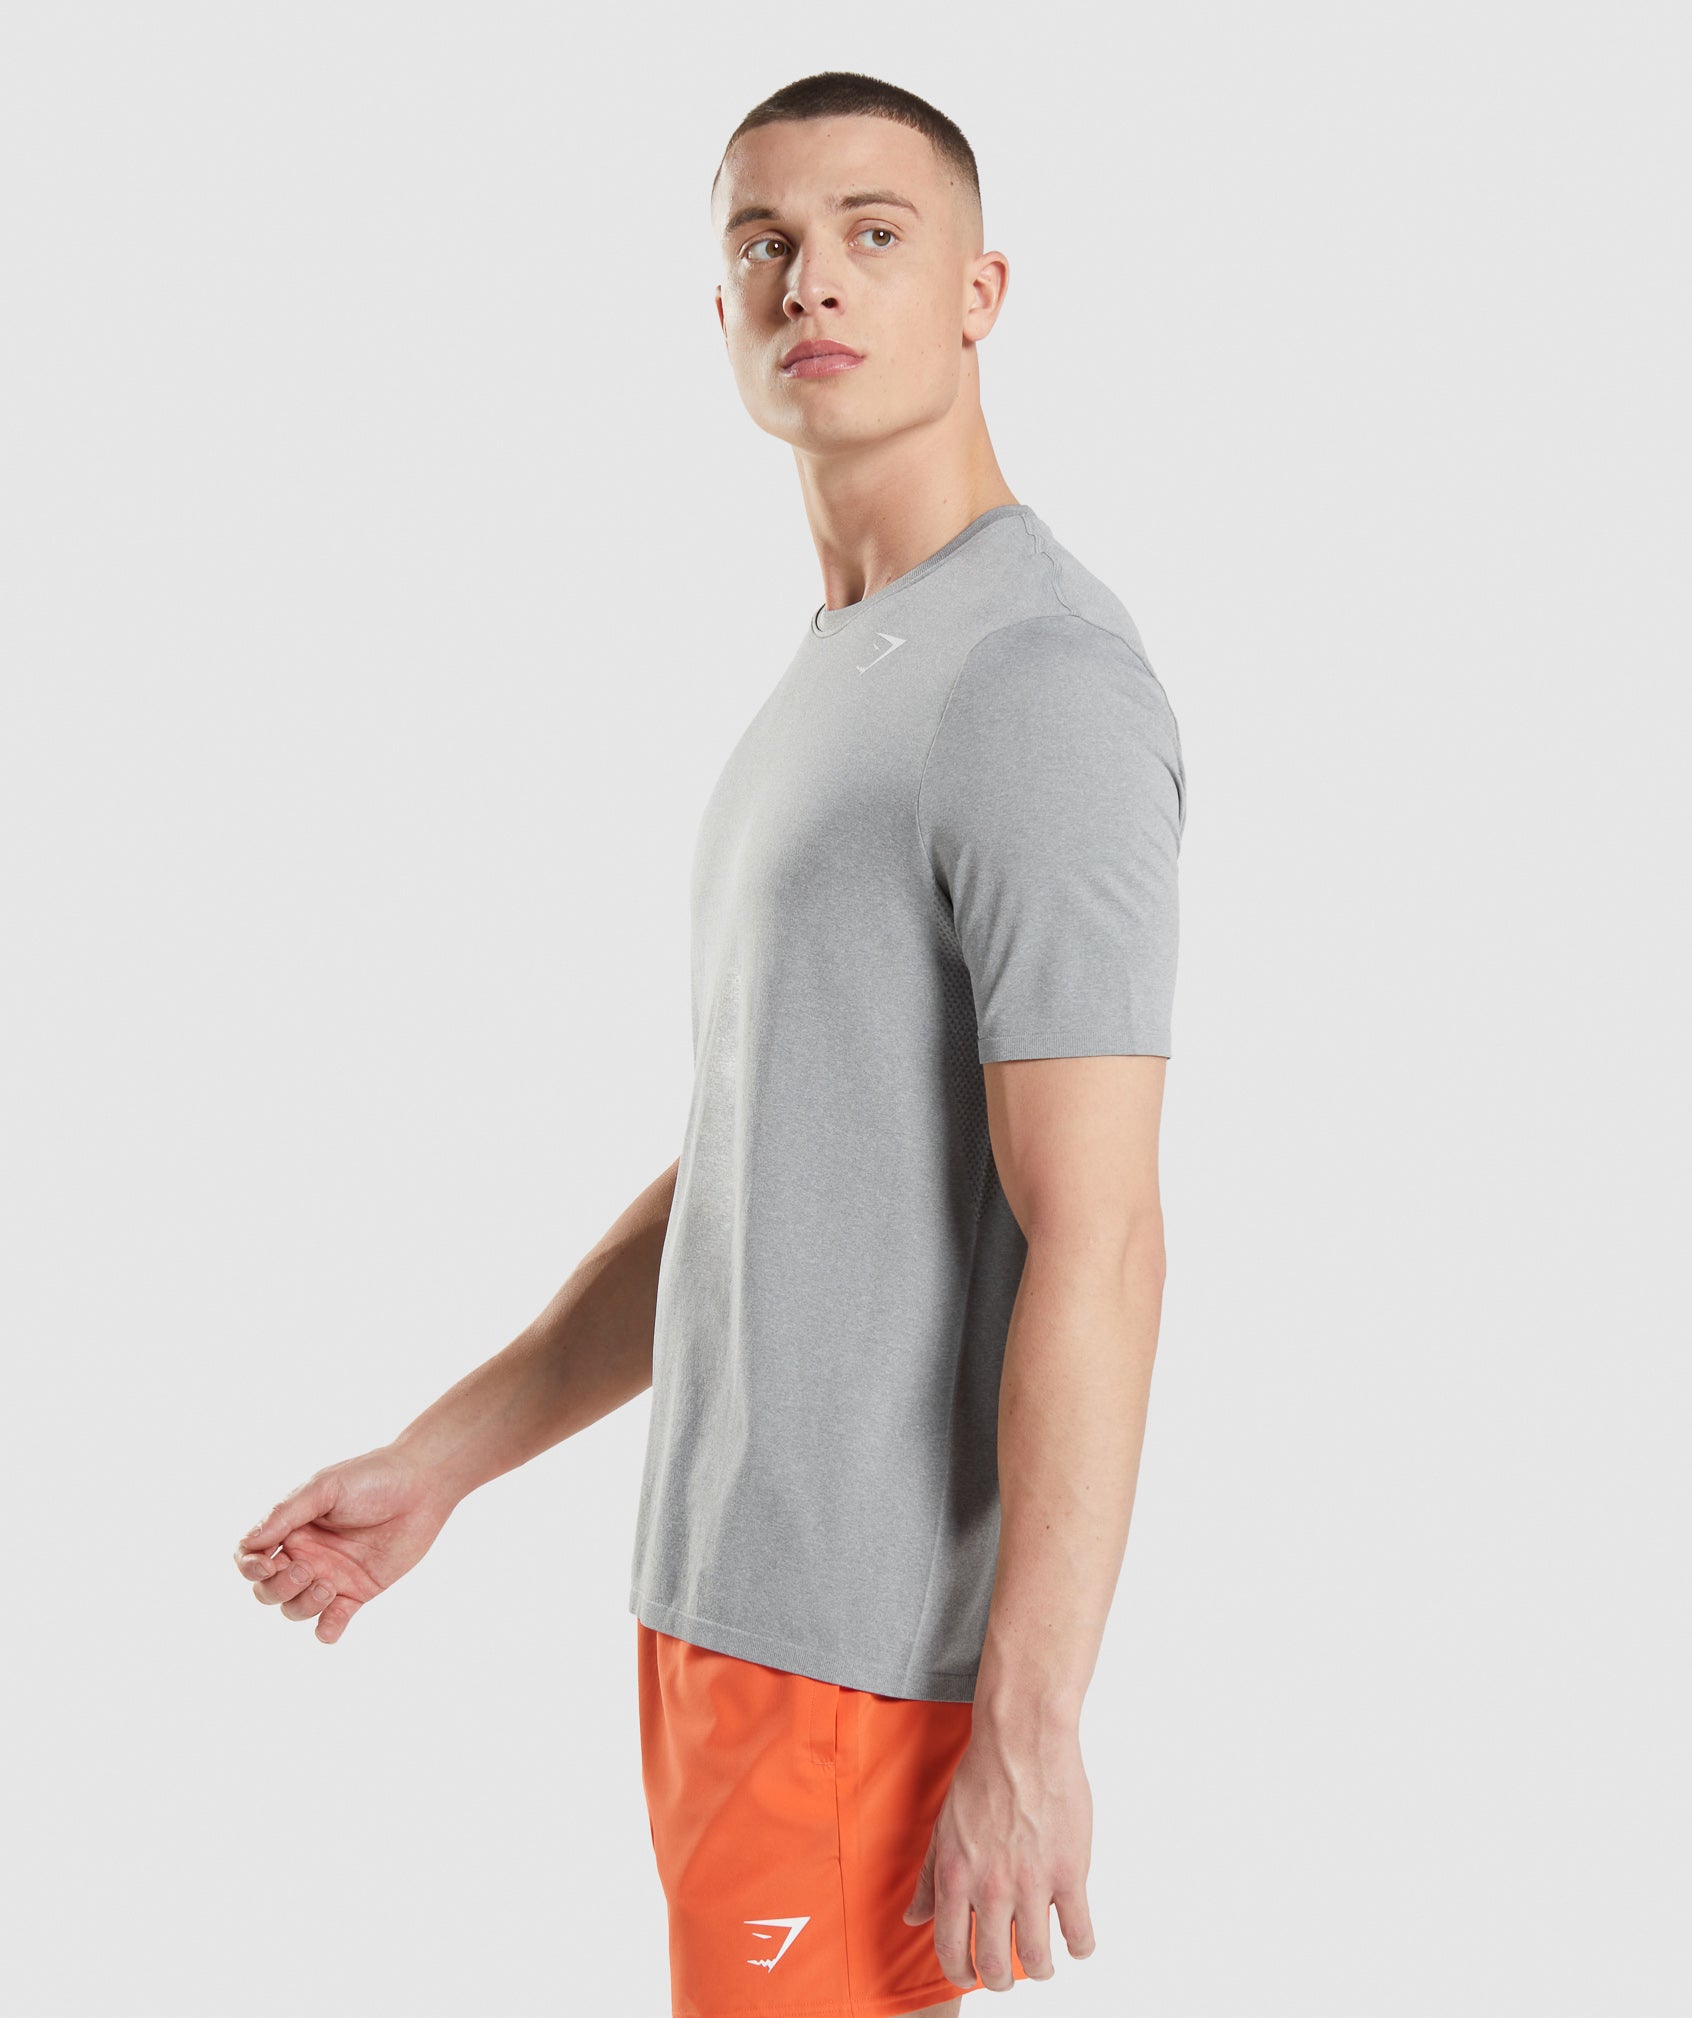 Arrival Seamless T-Shirt in Grey - view 3